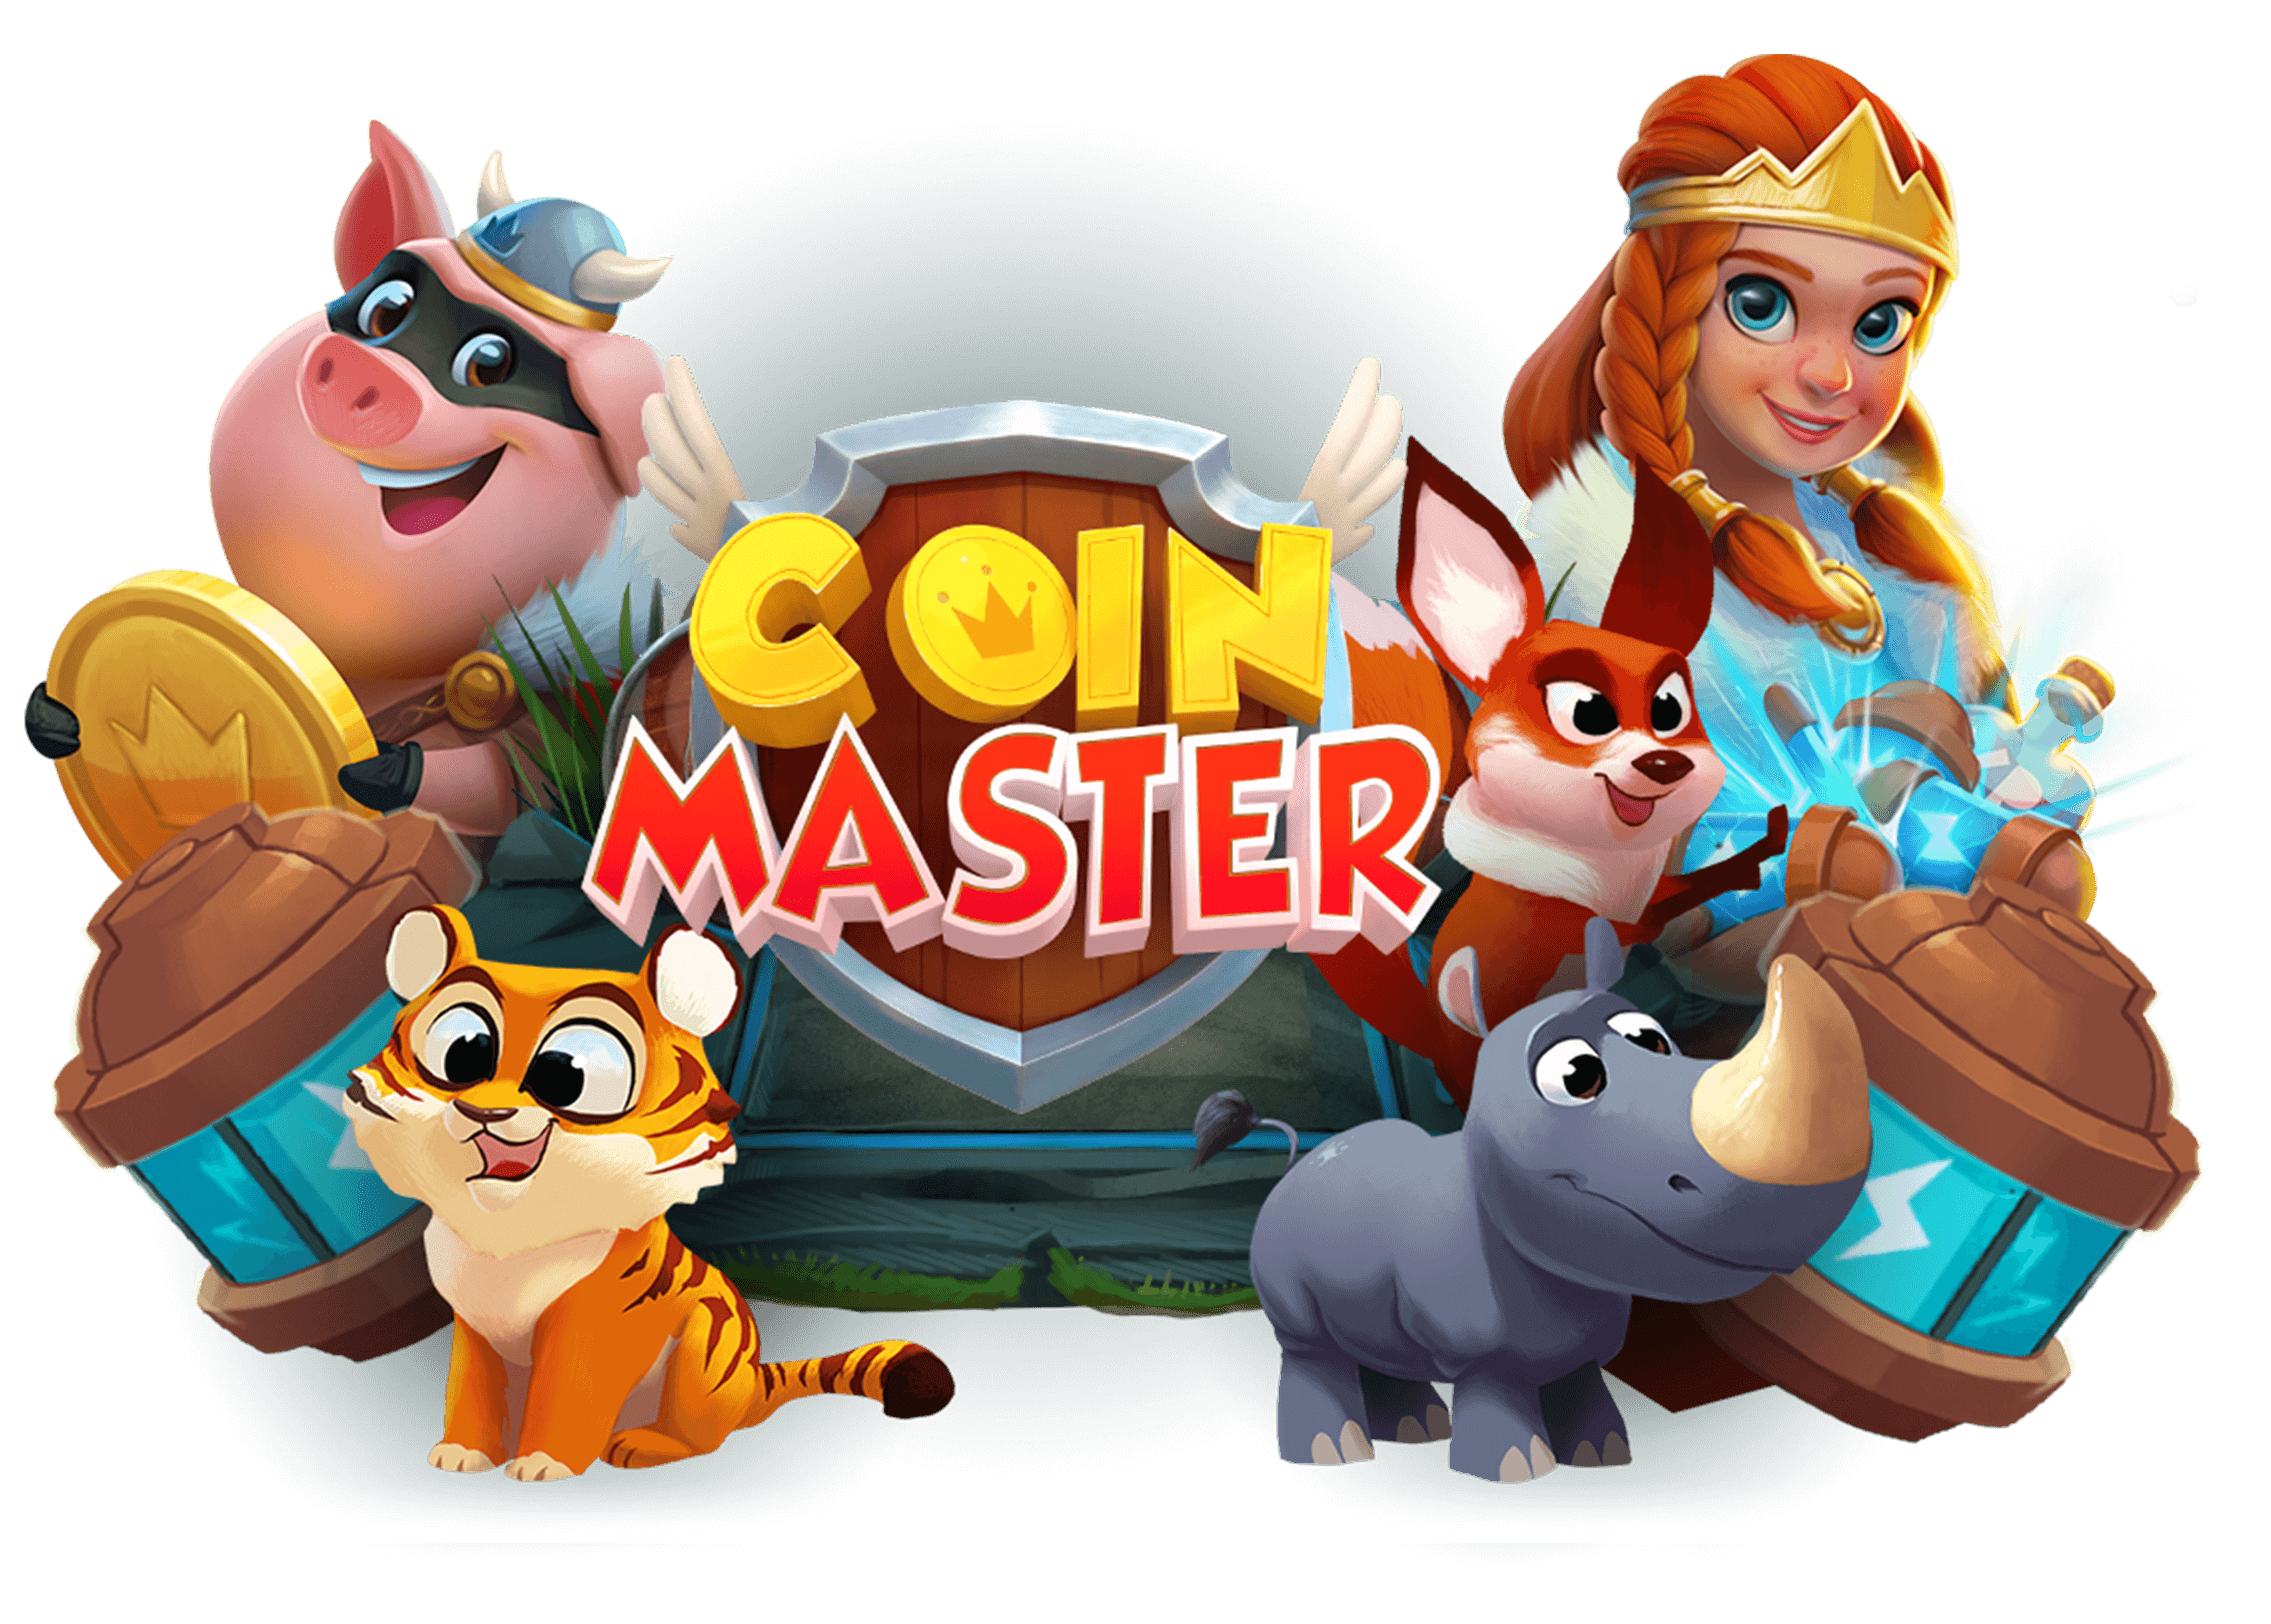 Coin Master Guide & Tutorial - How To Change The Username